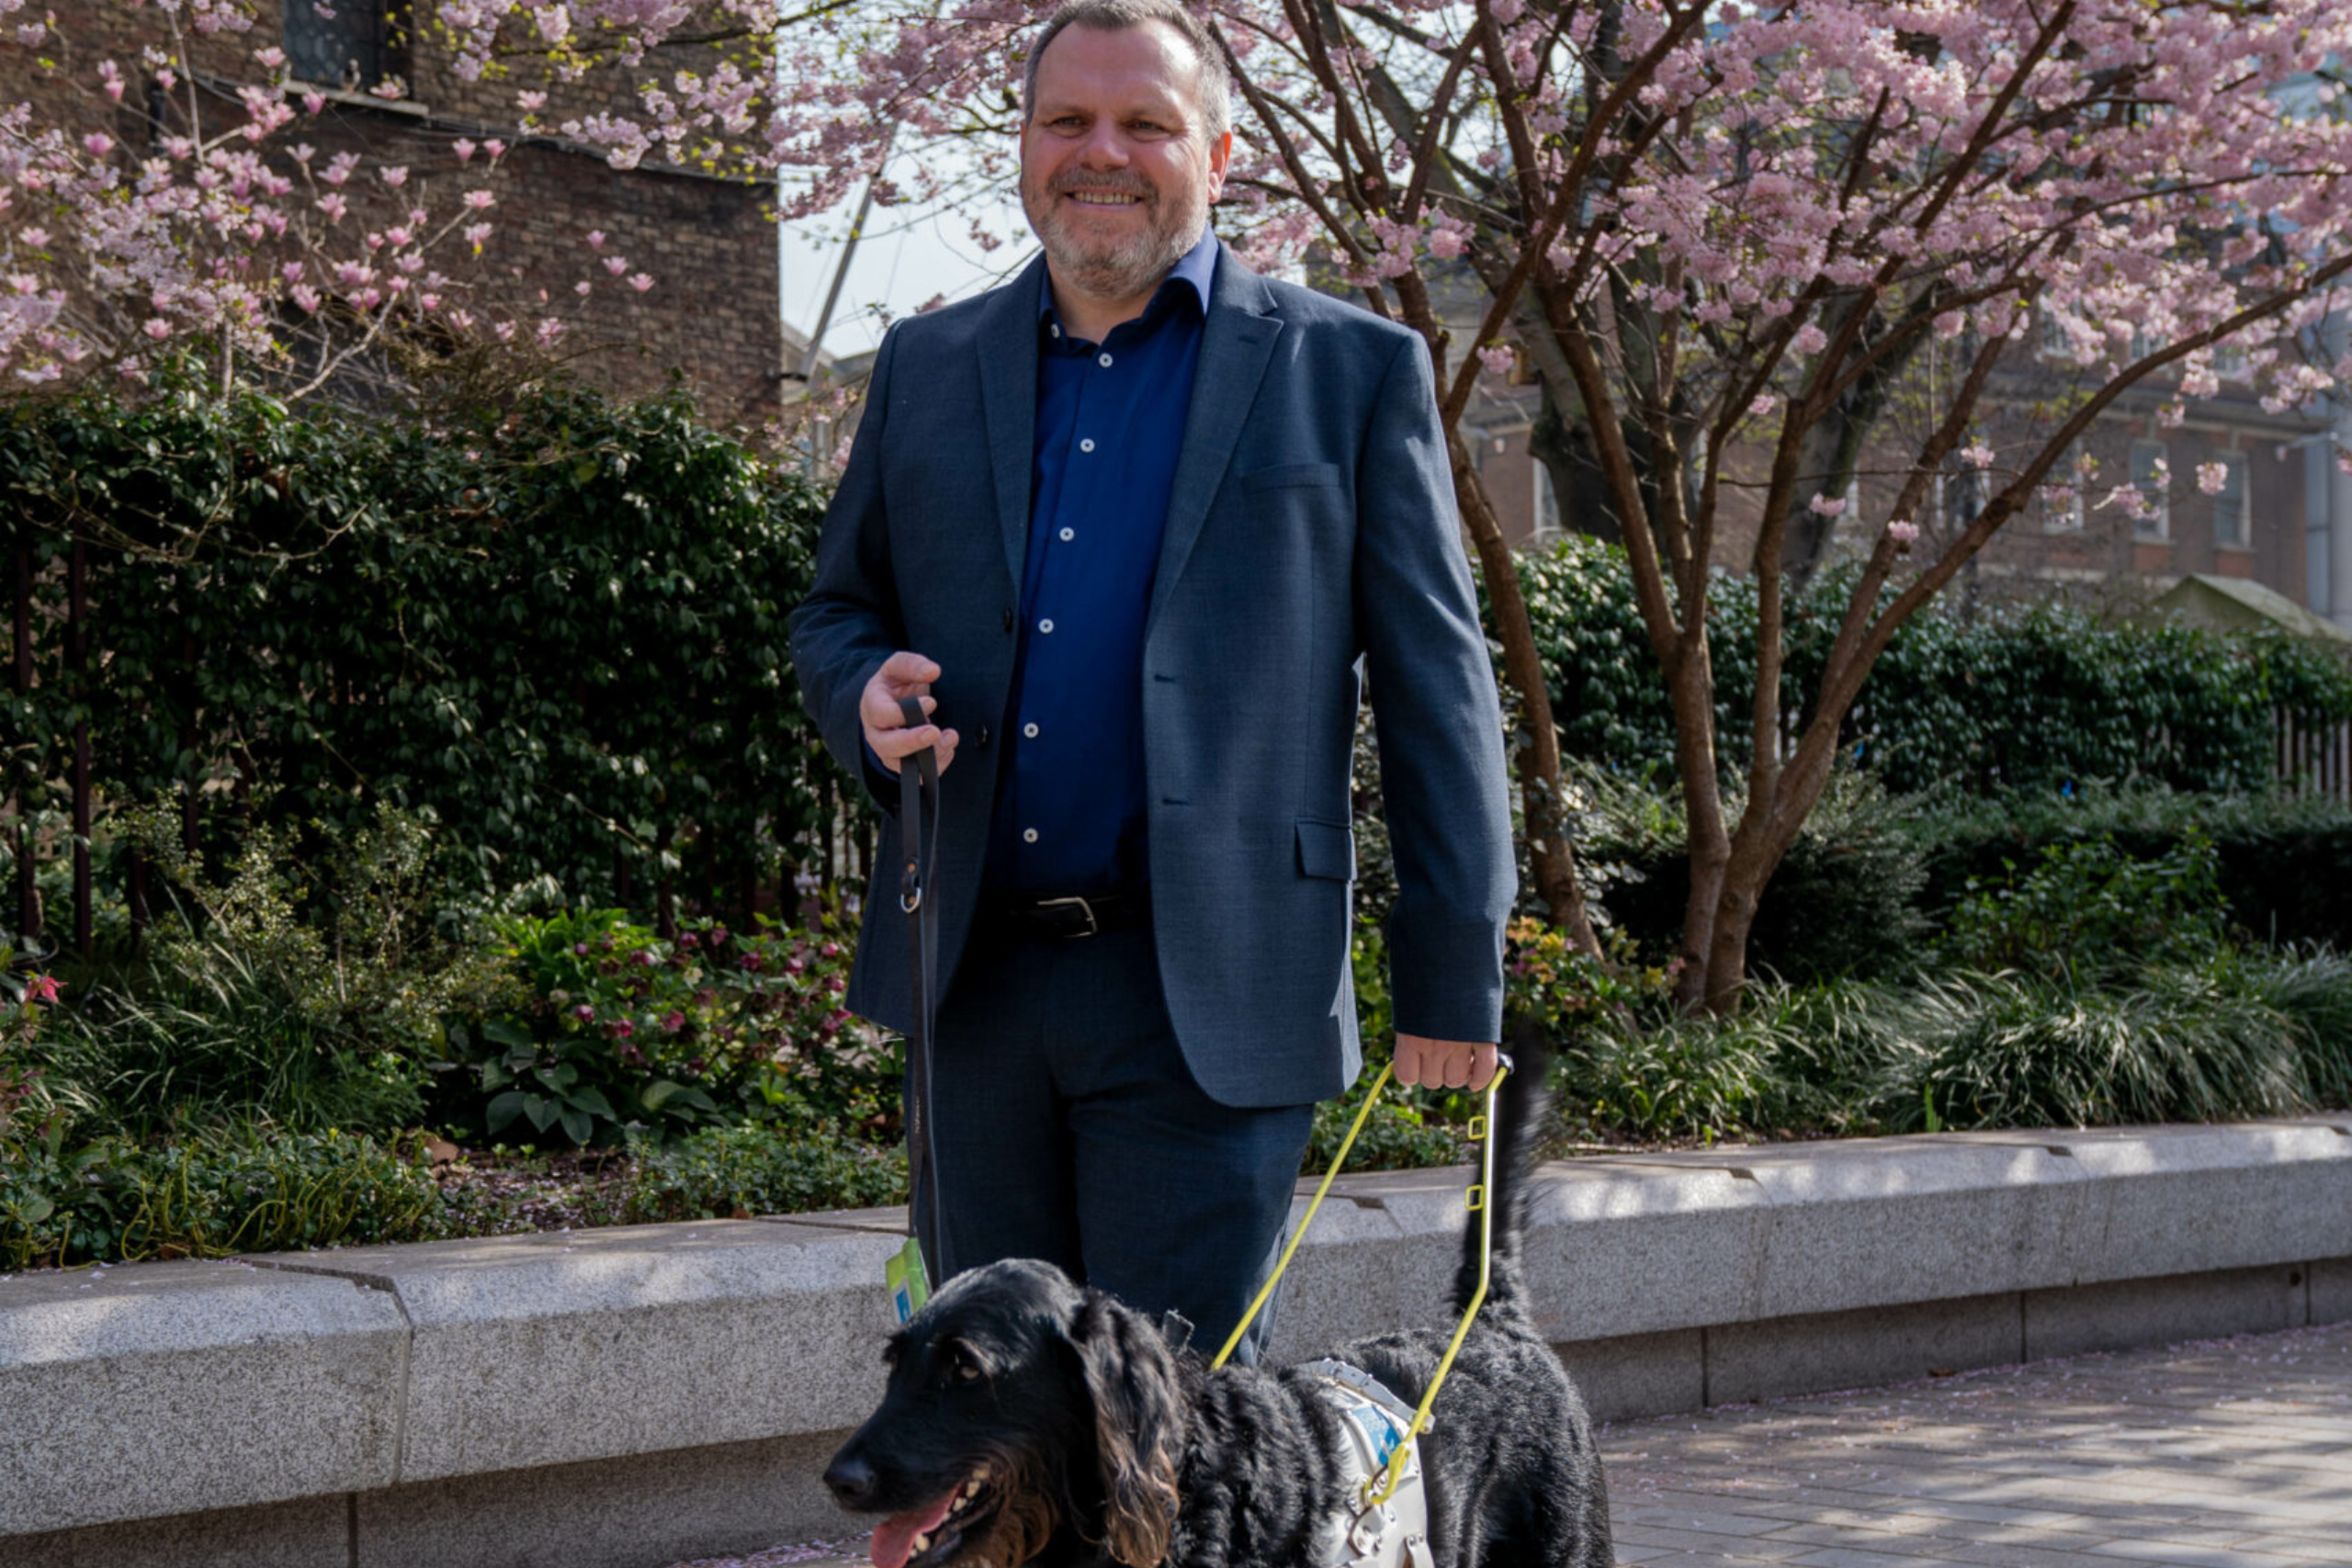 Keith Valentine with his guide dog, Dottie